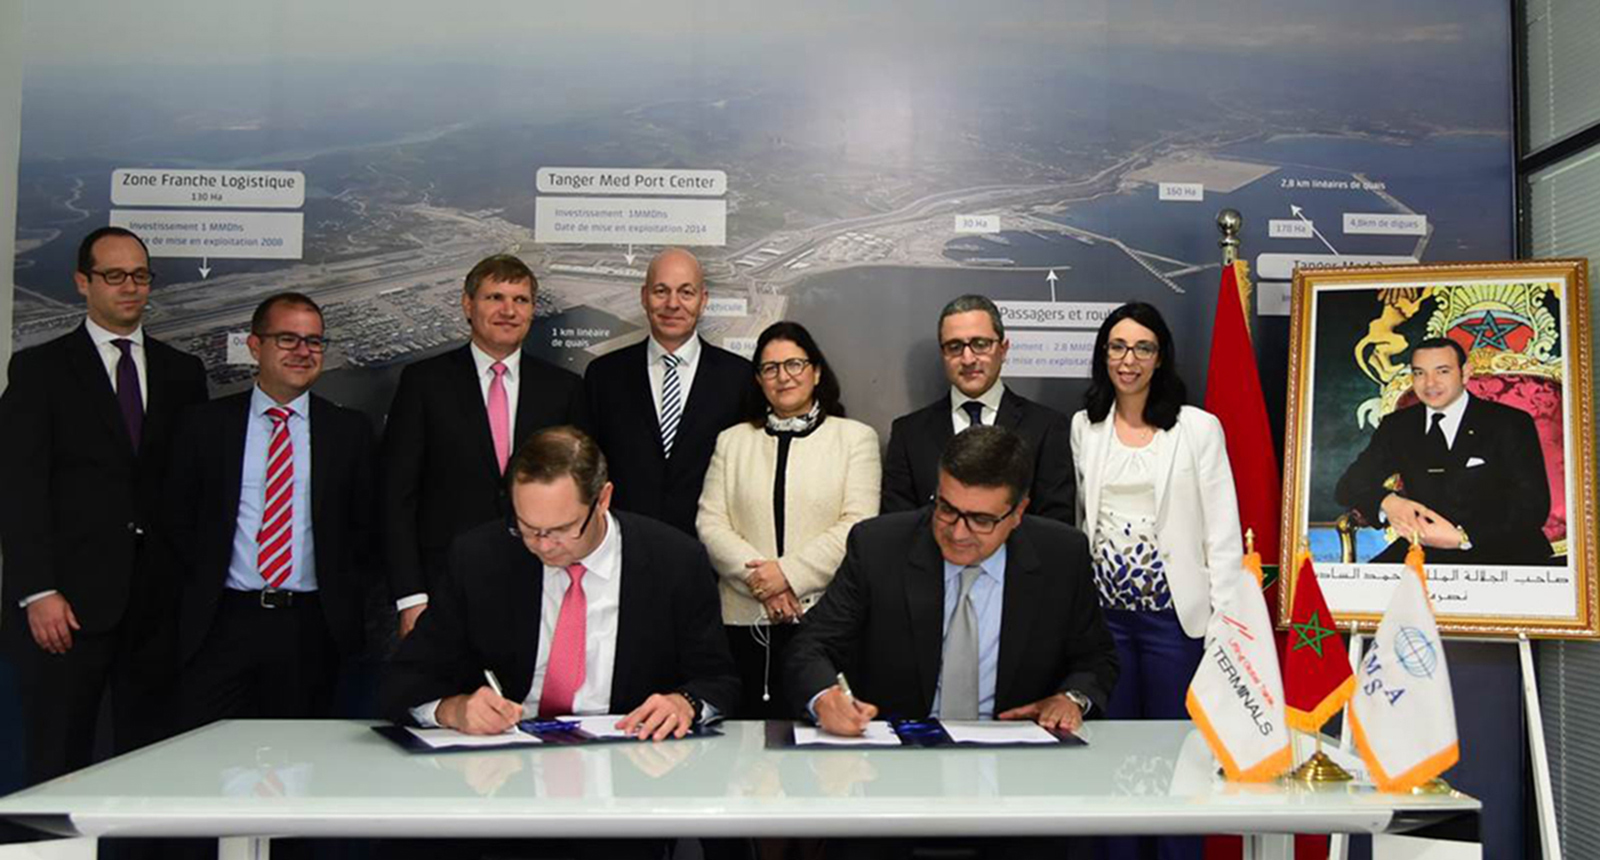 CEO of APM Terminals, Kim Fejfer (seated left) and Chairman of Tanger Med Special Agency, Fouad Brini (seated right) signing an agreement for development of a new container transshipment terminal at the Tanger Med 2 port complex in Morocco. 